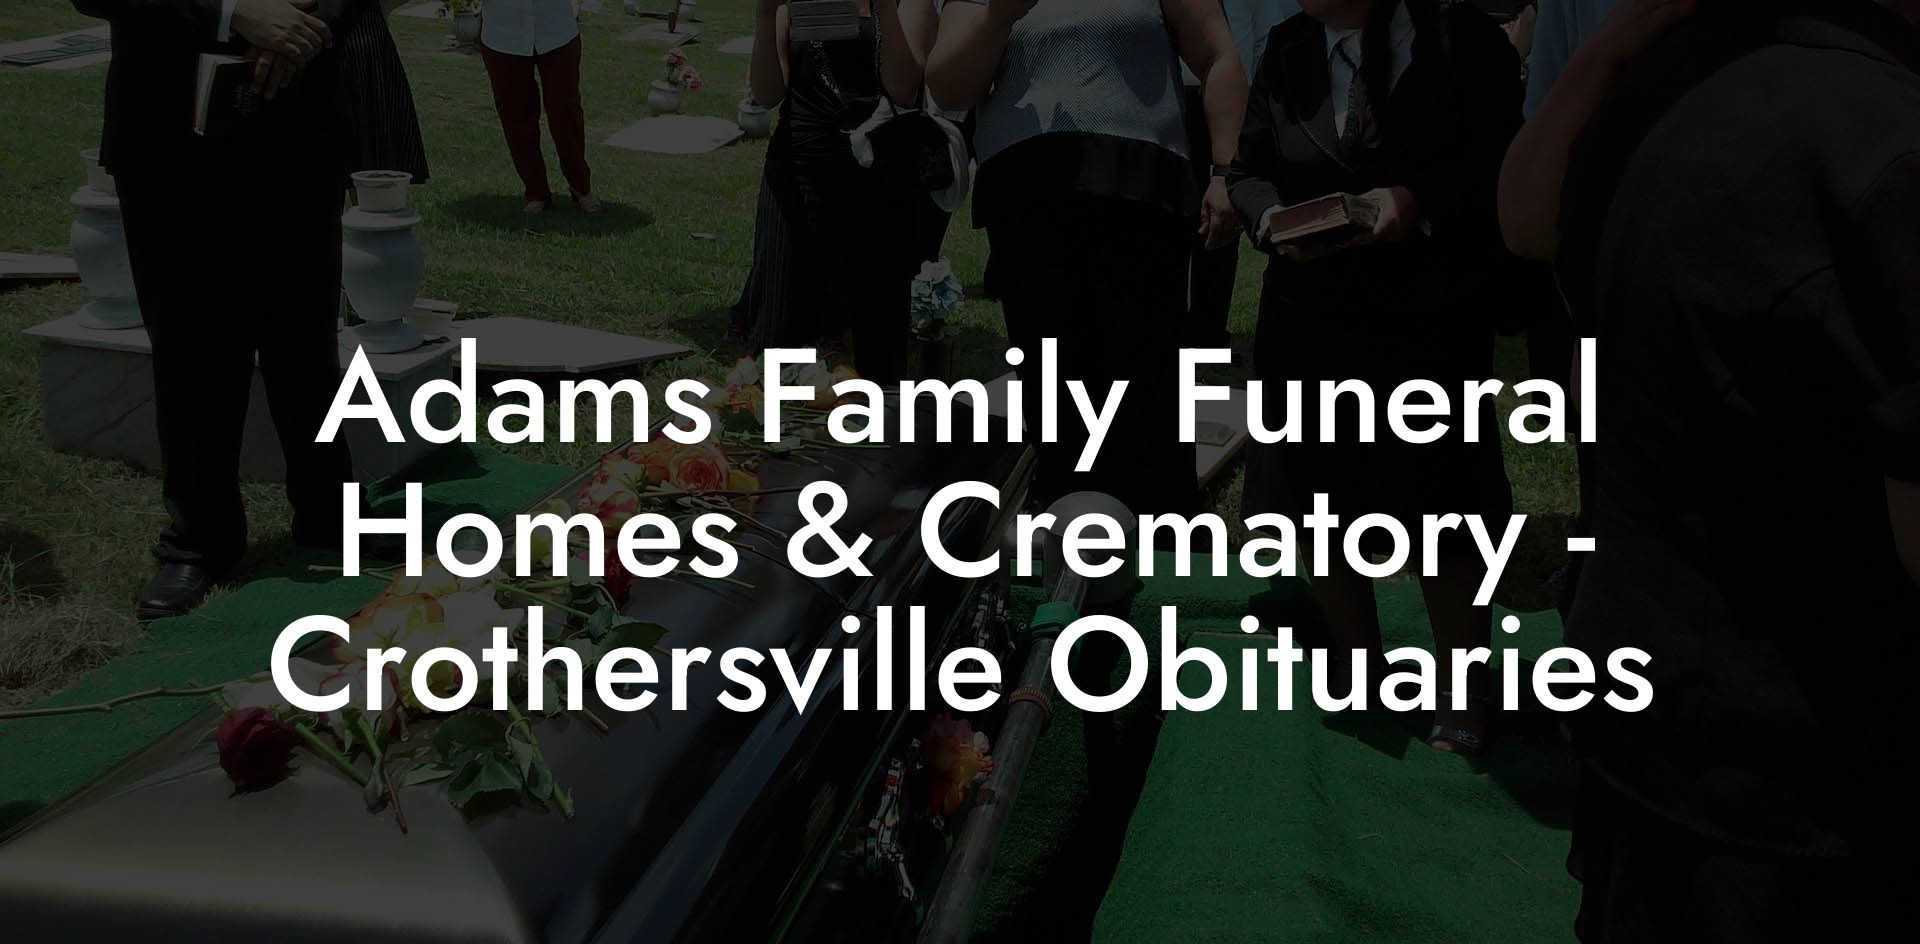 Adams Family Funeral Homes & Crematory - Crothersville Obituaries